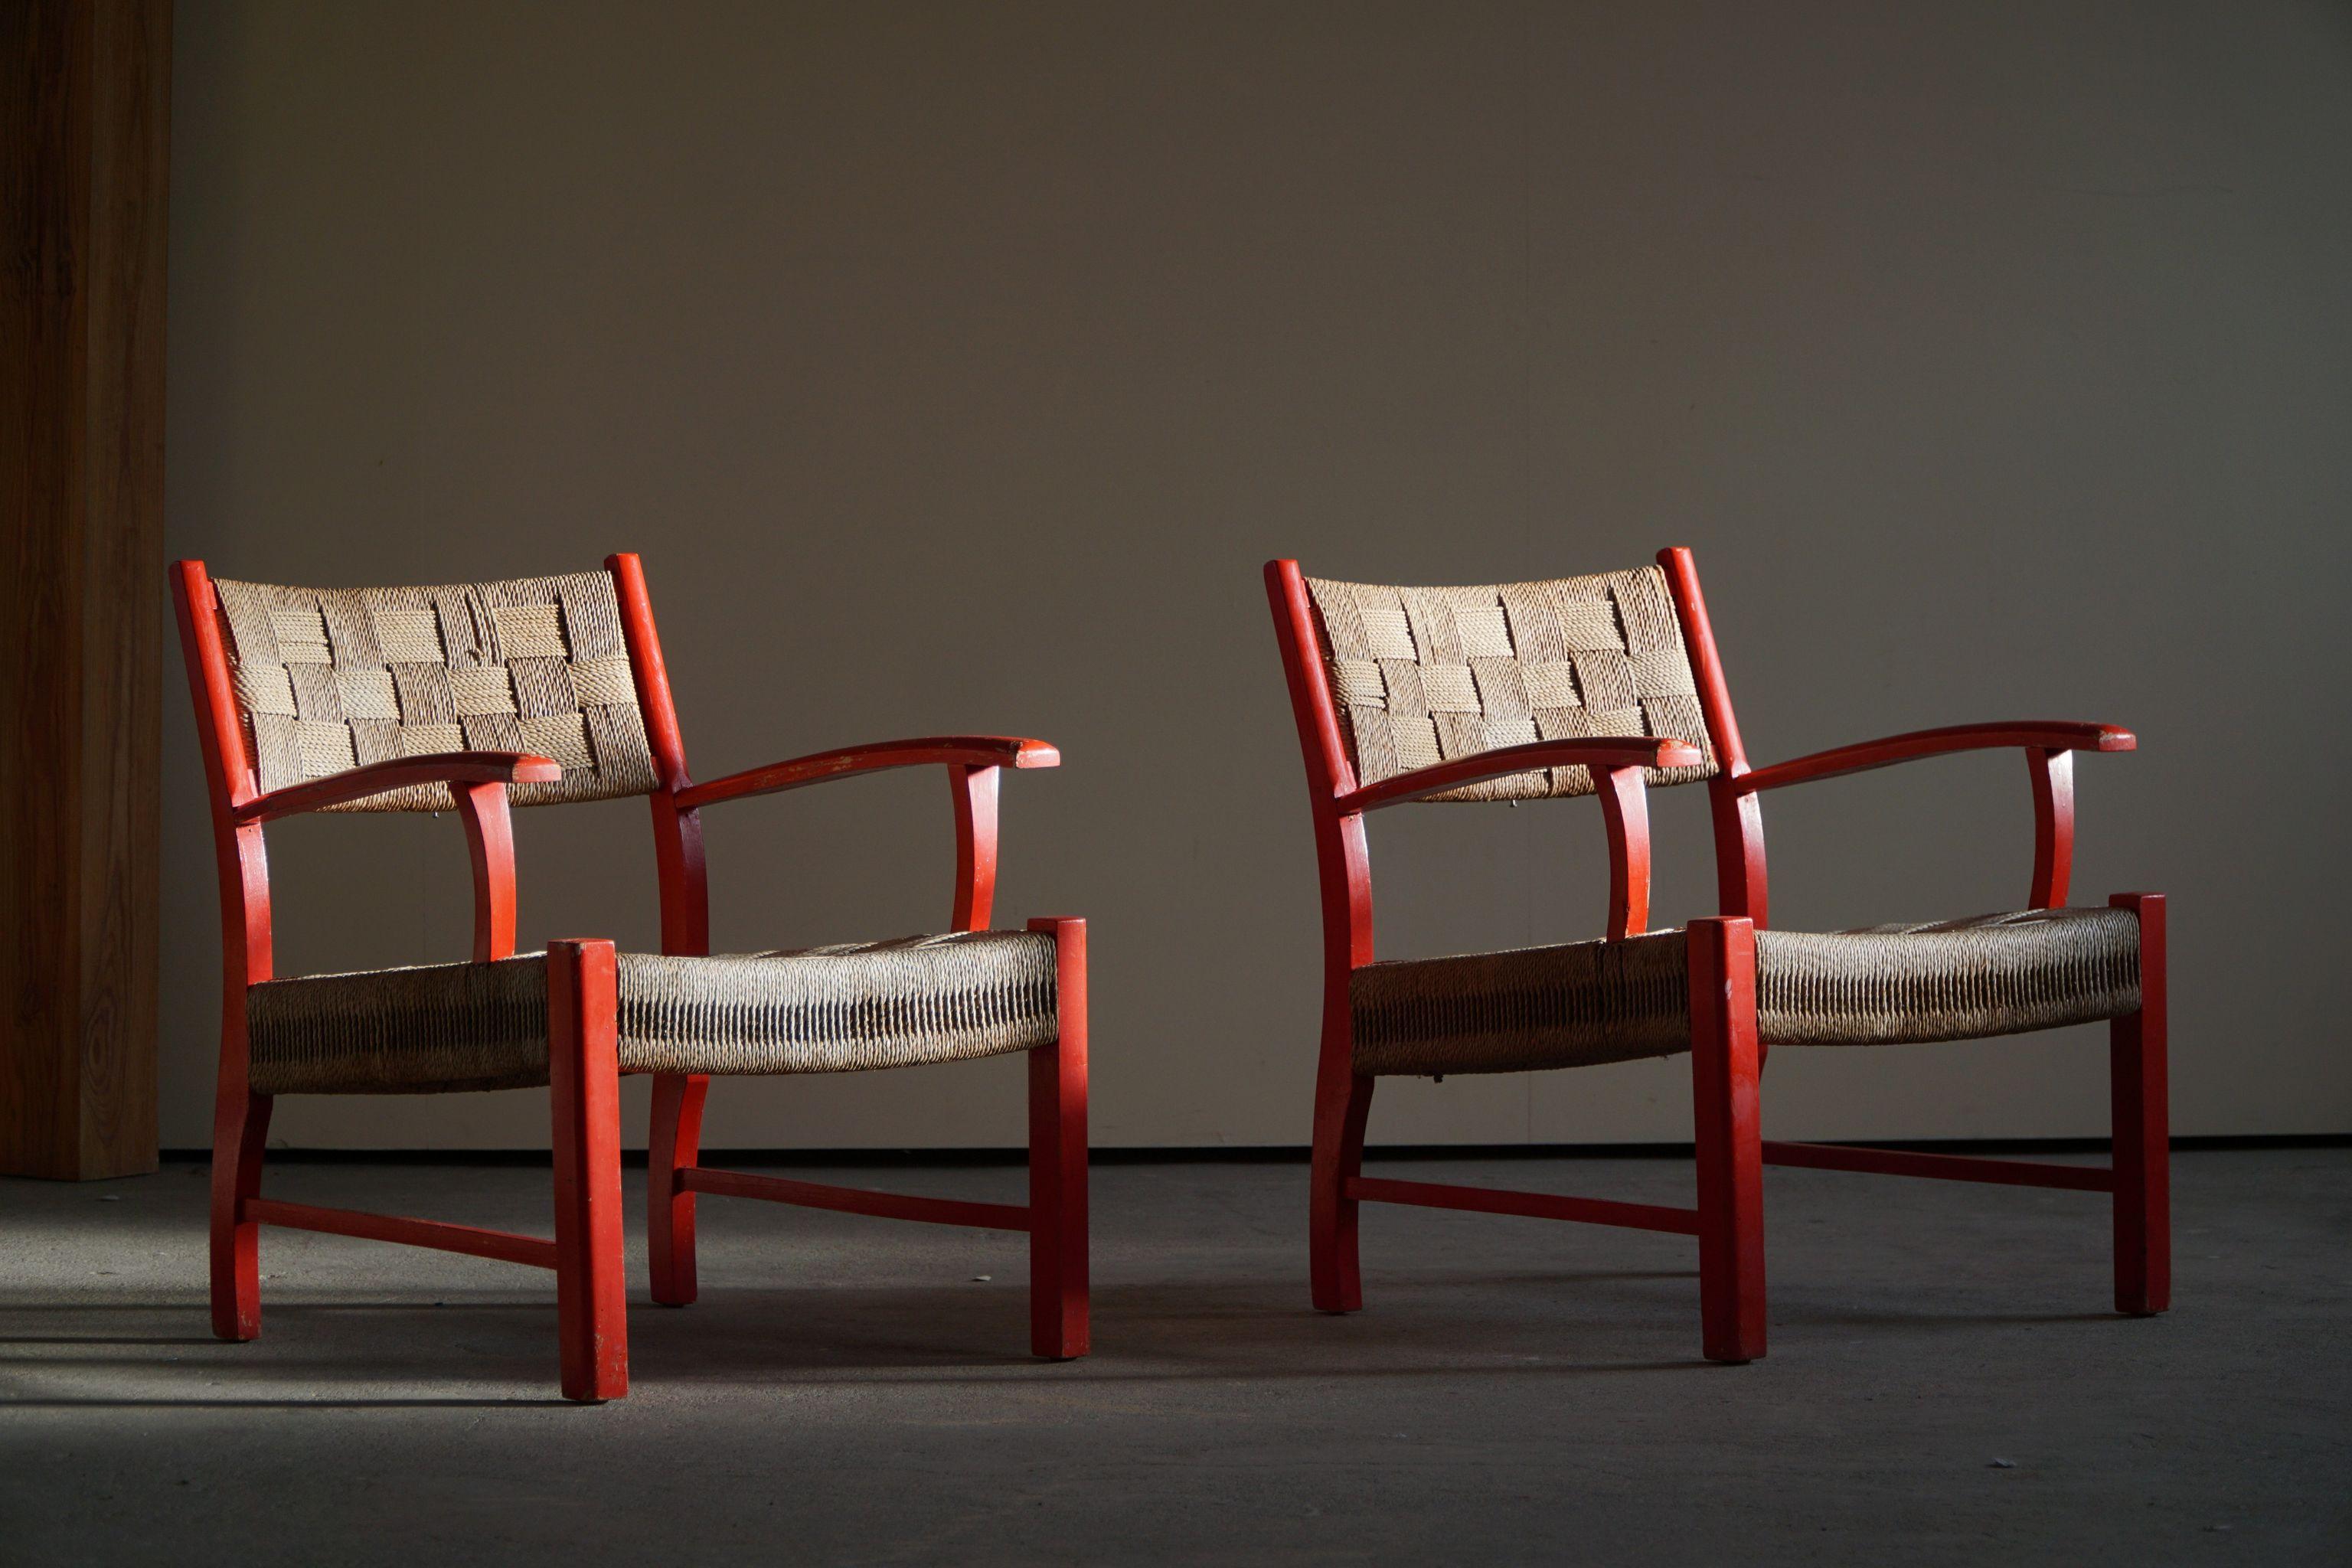 Pair of Danish armchairs in solid red lacquered beechwood and woven seagrass. Anonymous designer, manufactured by Fritz Hansen. It could be designed by either Karl Schröder or Frits Schlegel. Made in 1930's-40's.

This classic pair would fit many